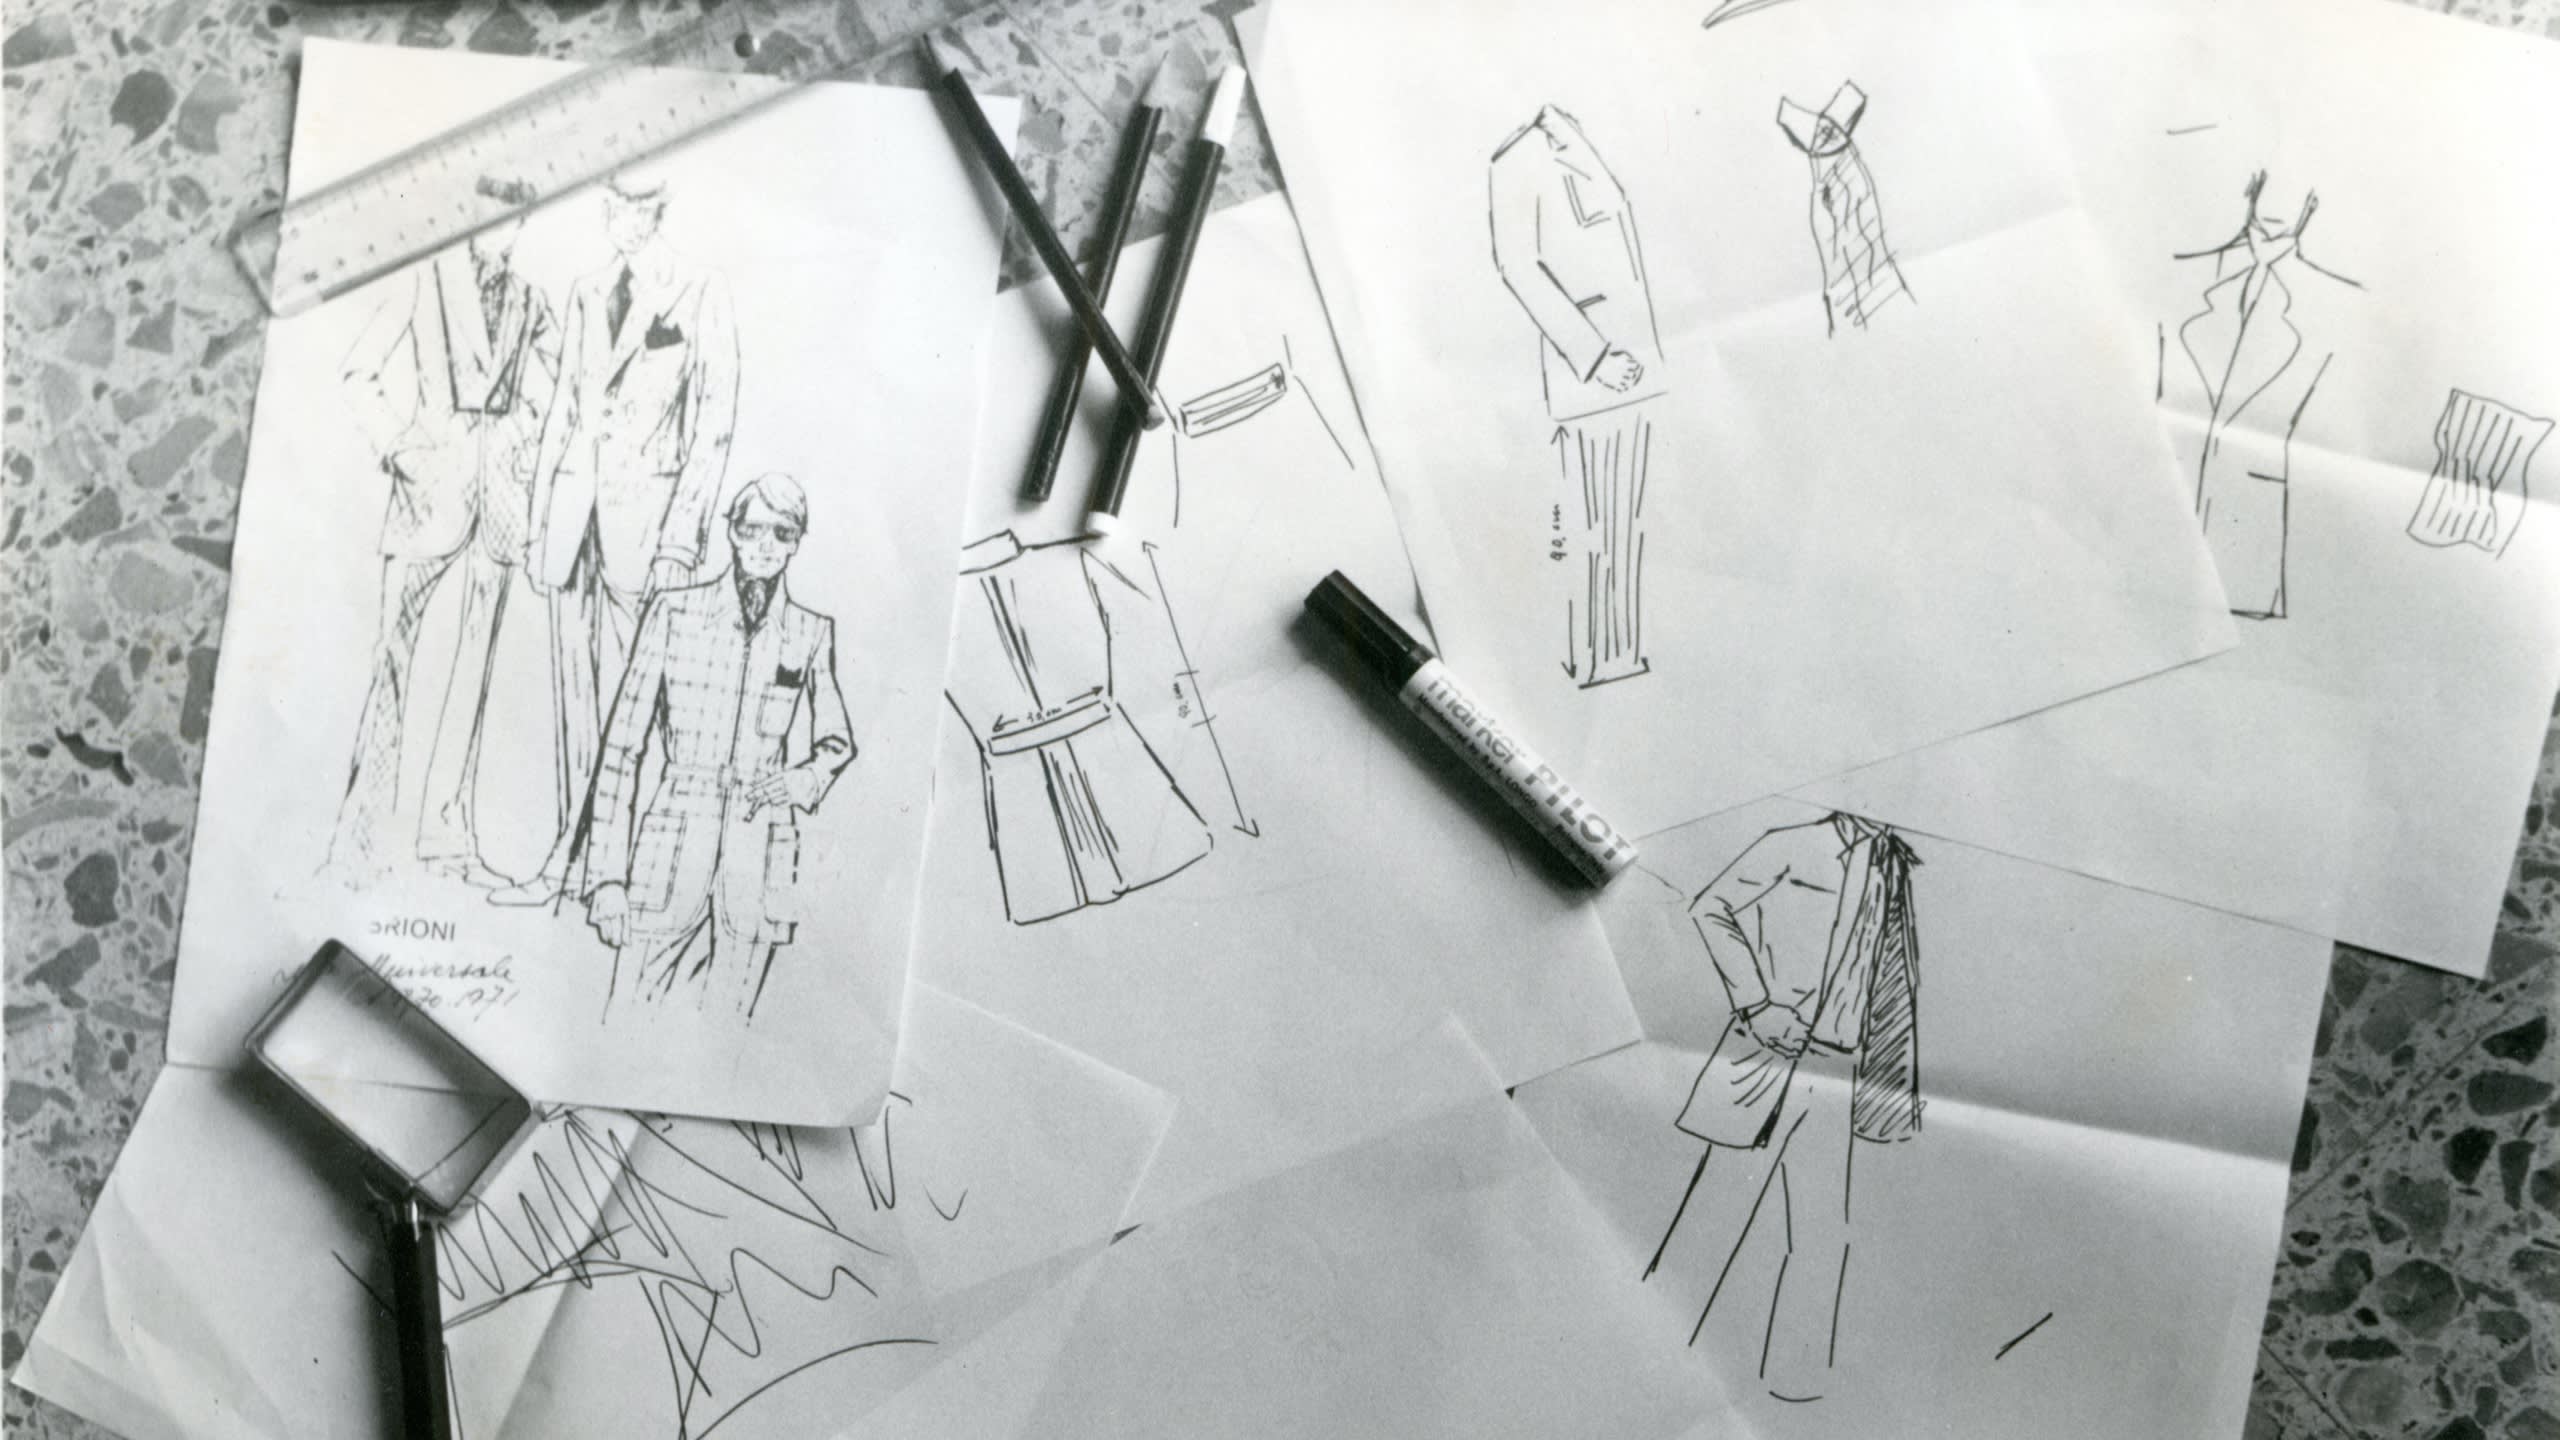 Brioni sketches from the 1970s